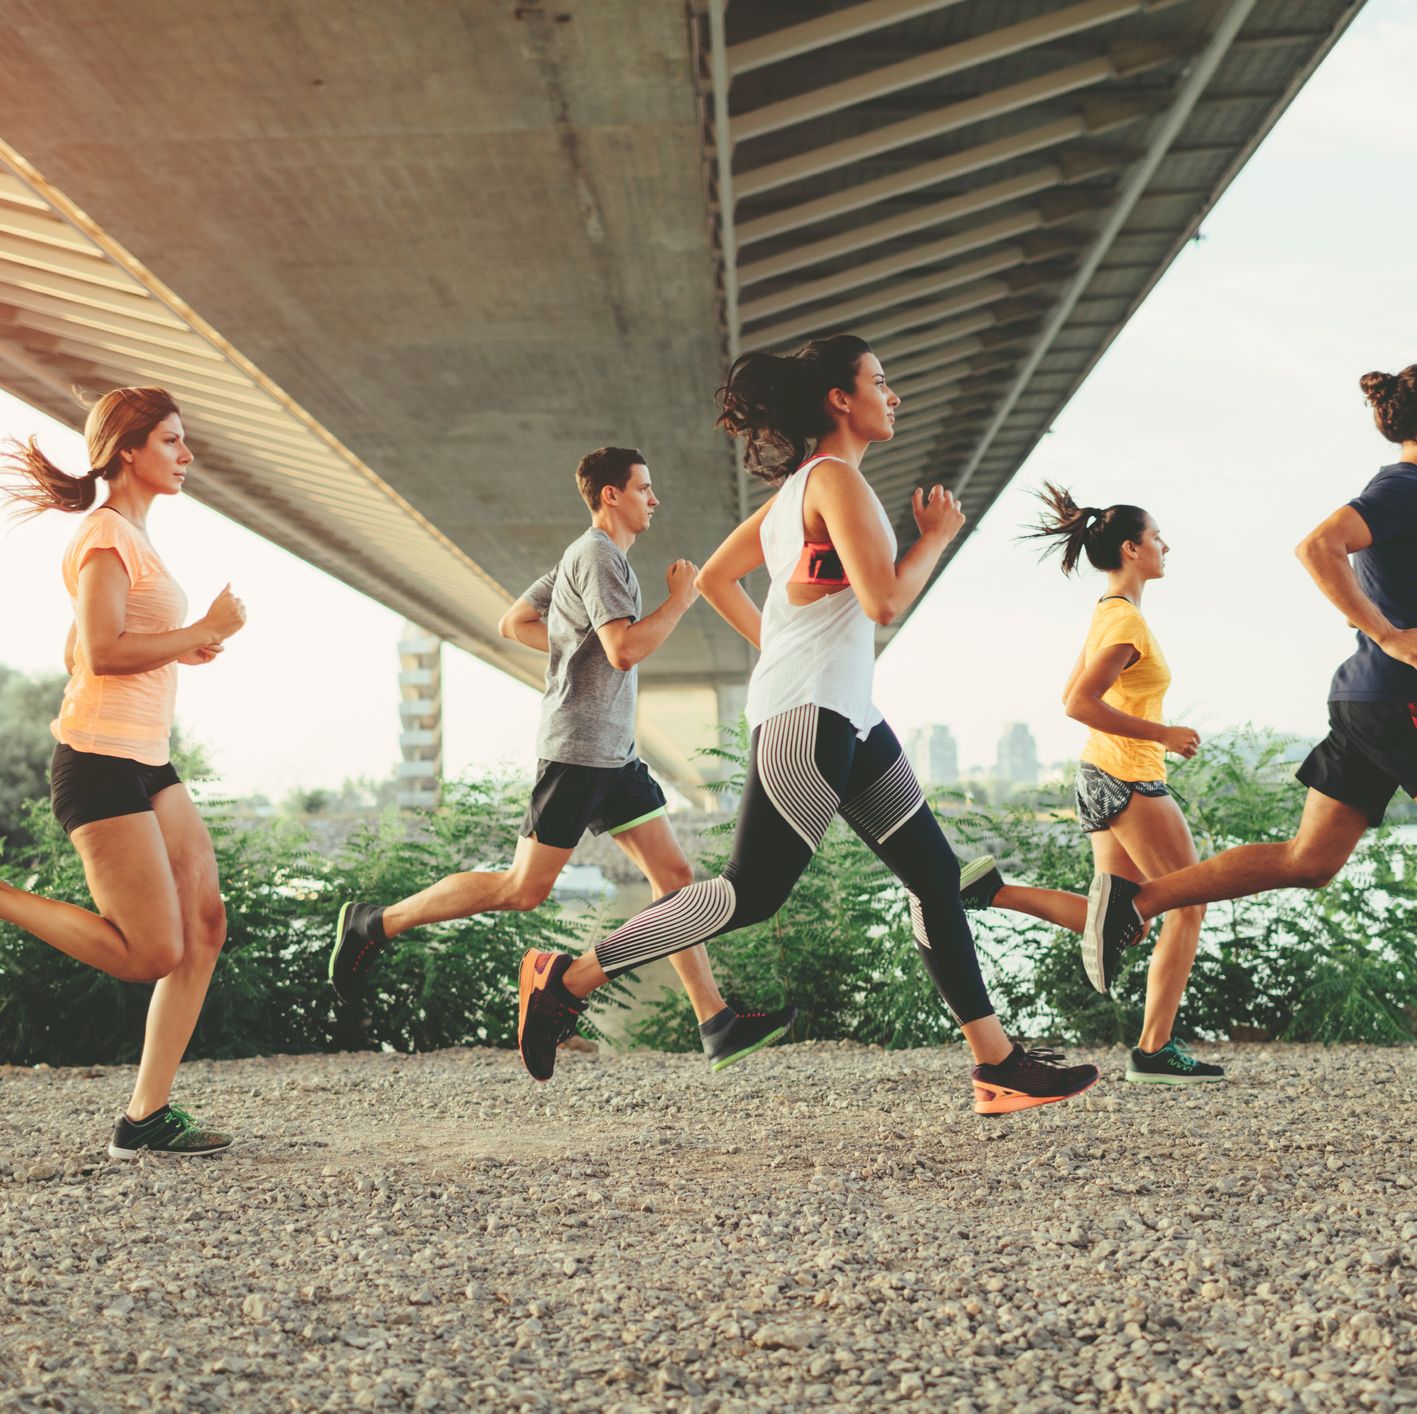 A Beginner's Guide for Overweight Runners: Fitness & Diet Tips